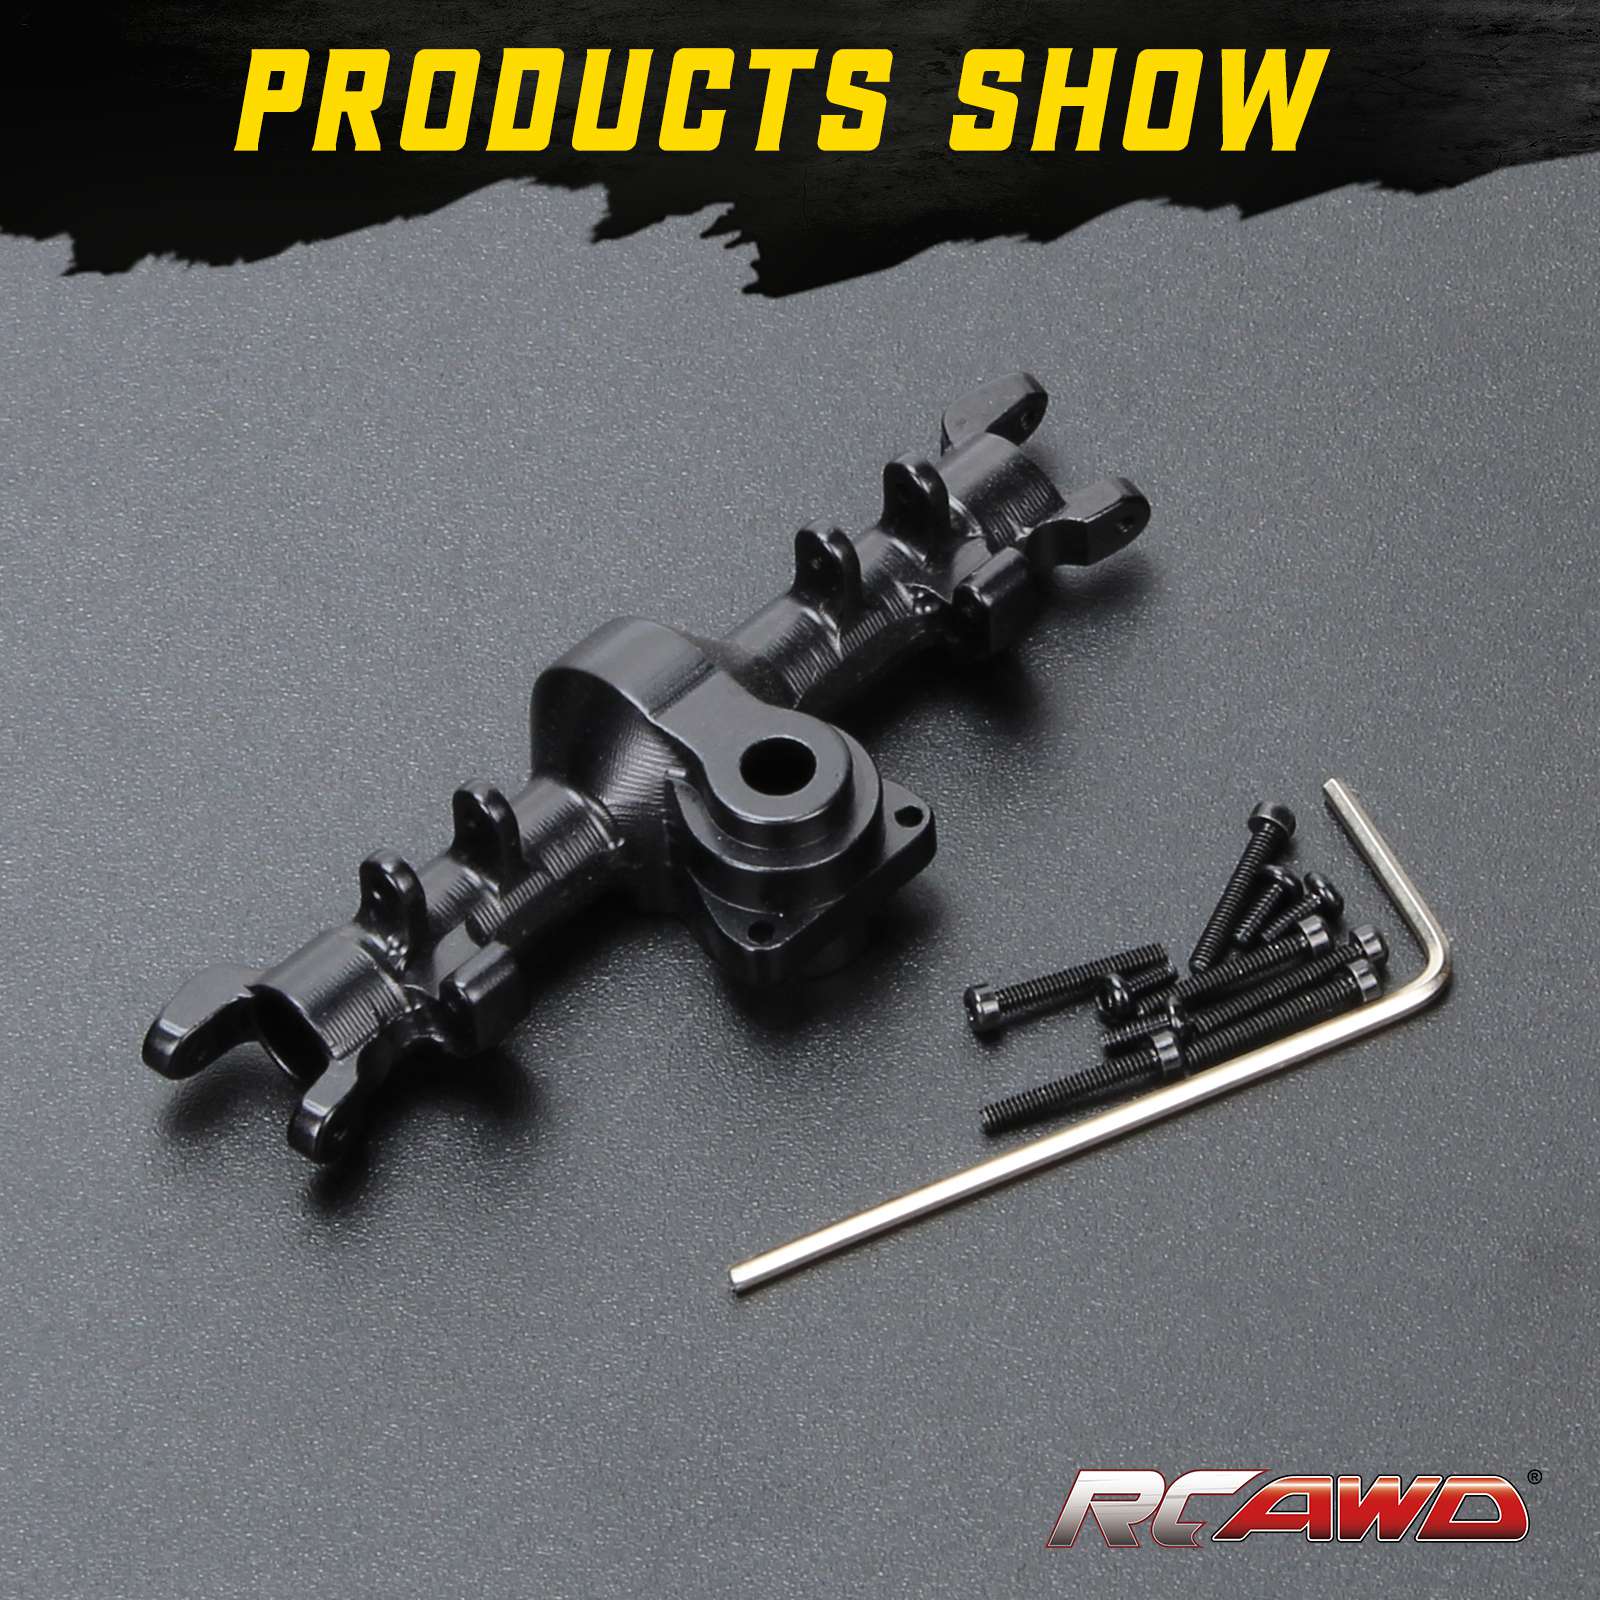 RCAWD Black RCAWD 1/24 Axial SCX24 Upgrades Aluminum alloy front axle housing w/o gears SCX2455